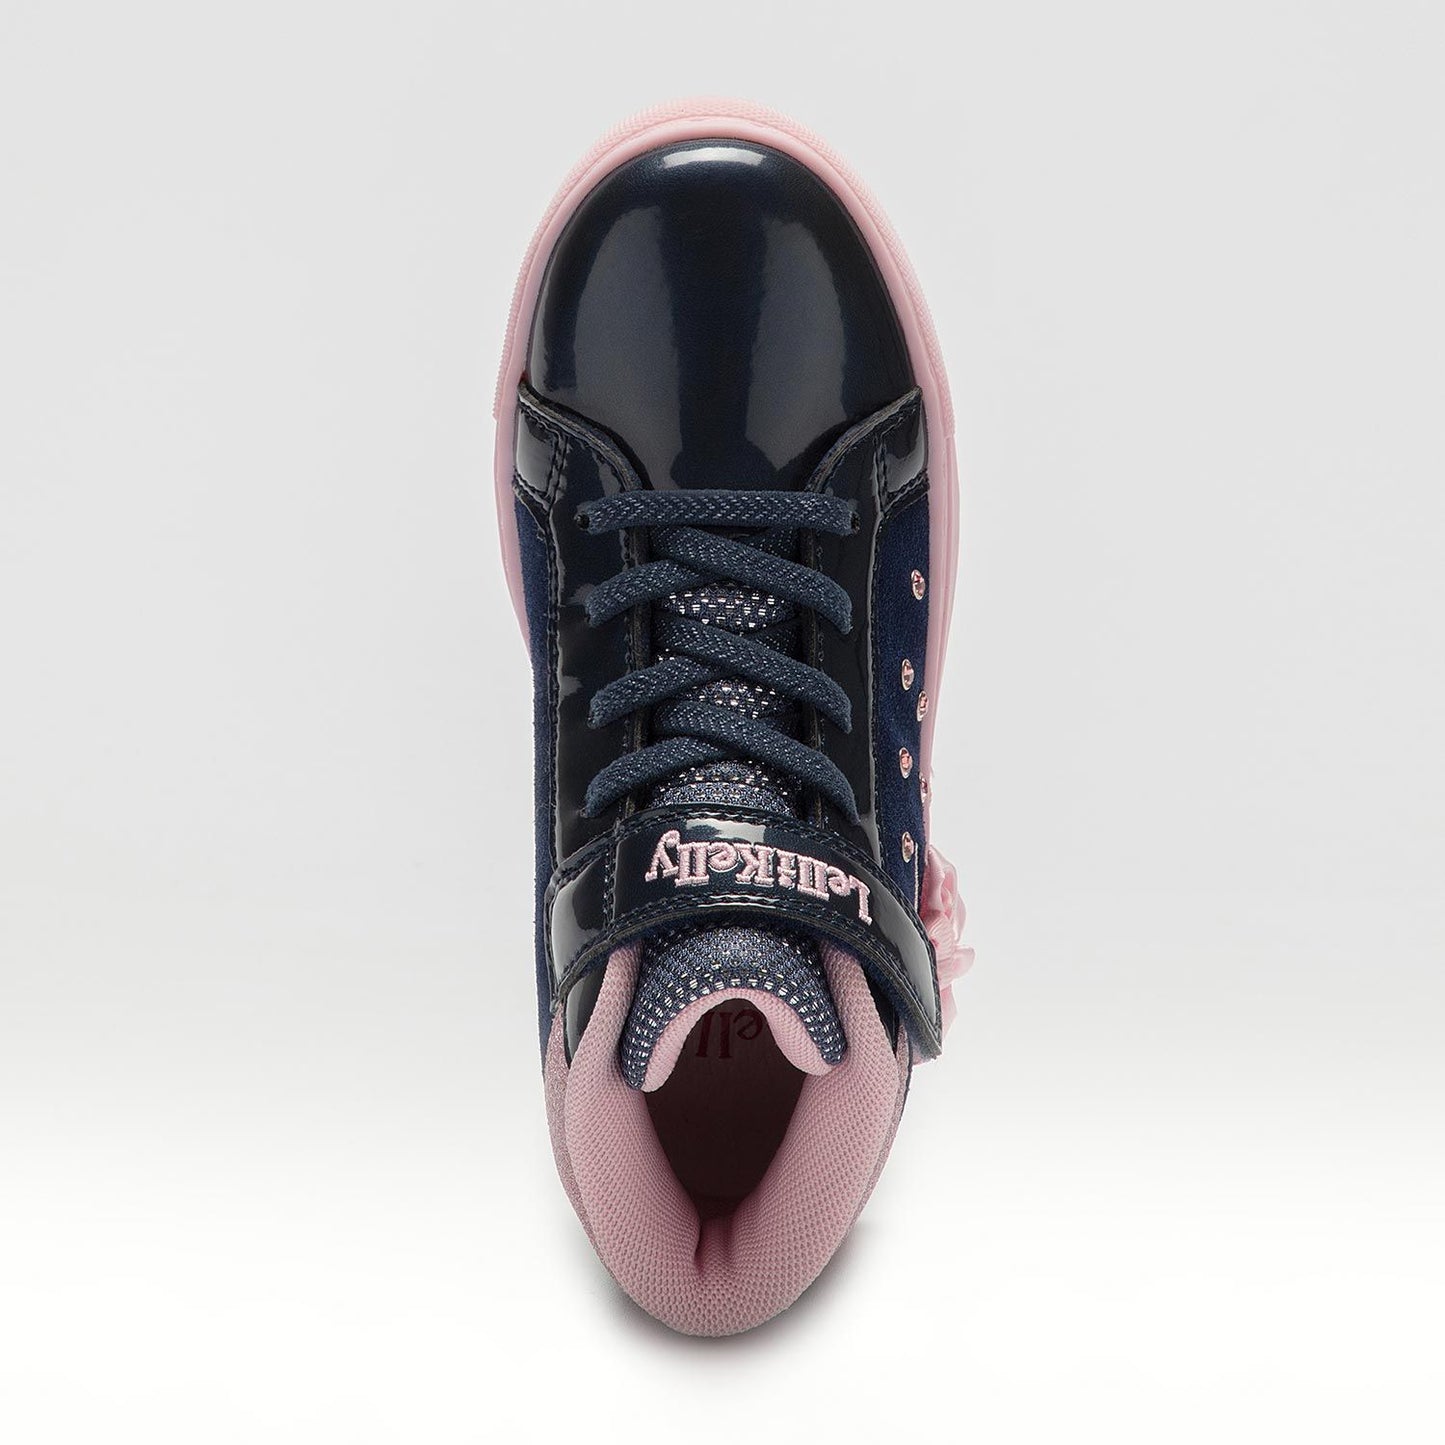 A girls hi top trainer by Lelli Kelly, style Mille Stelle, in navy and pink suede/patent with faux lace and velcro fastening. Above view.